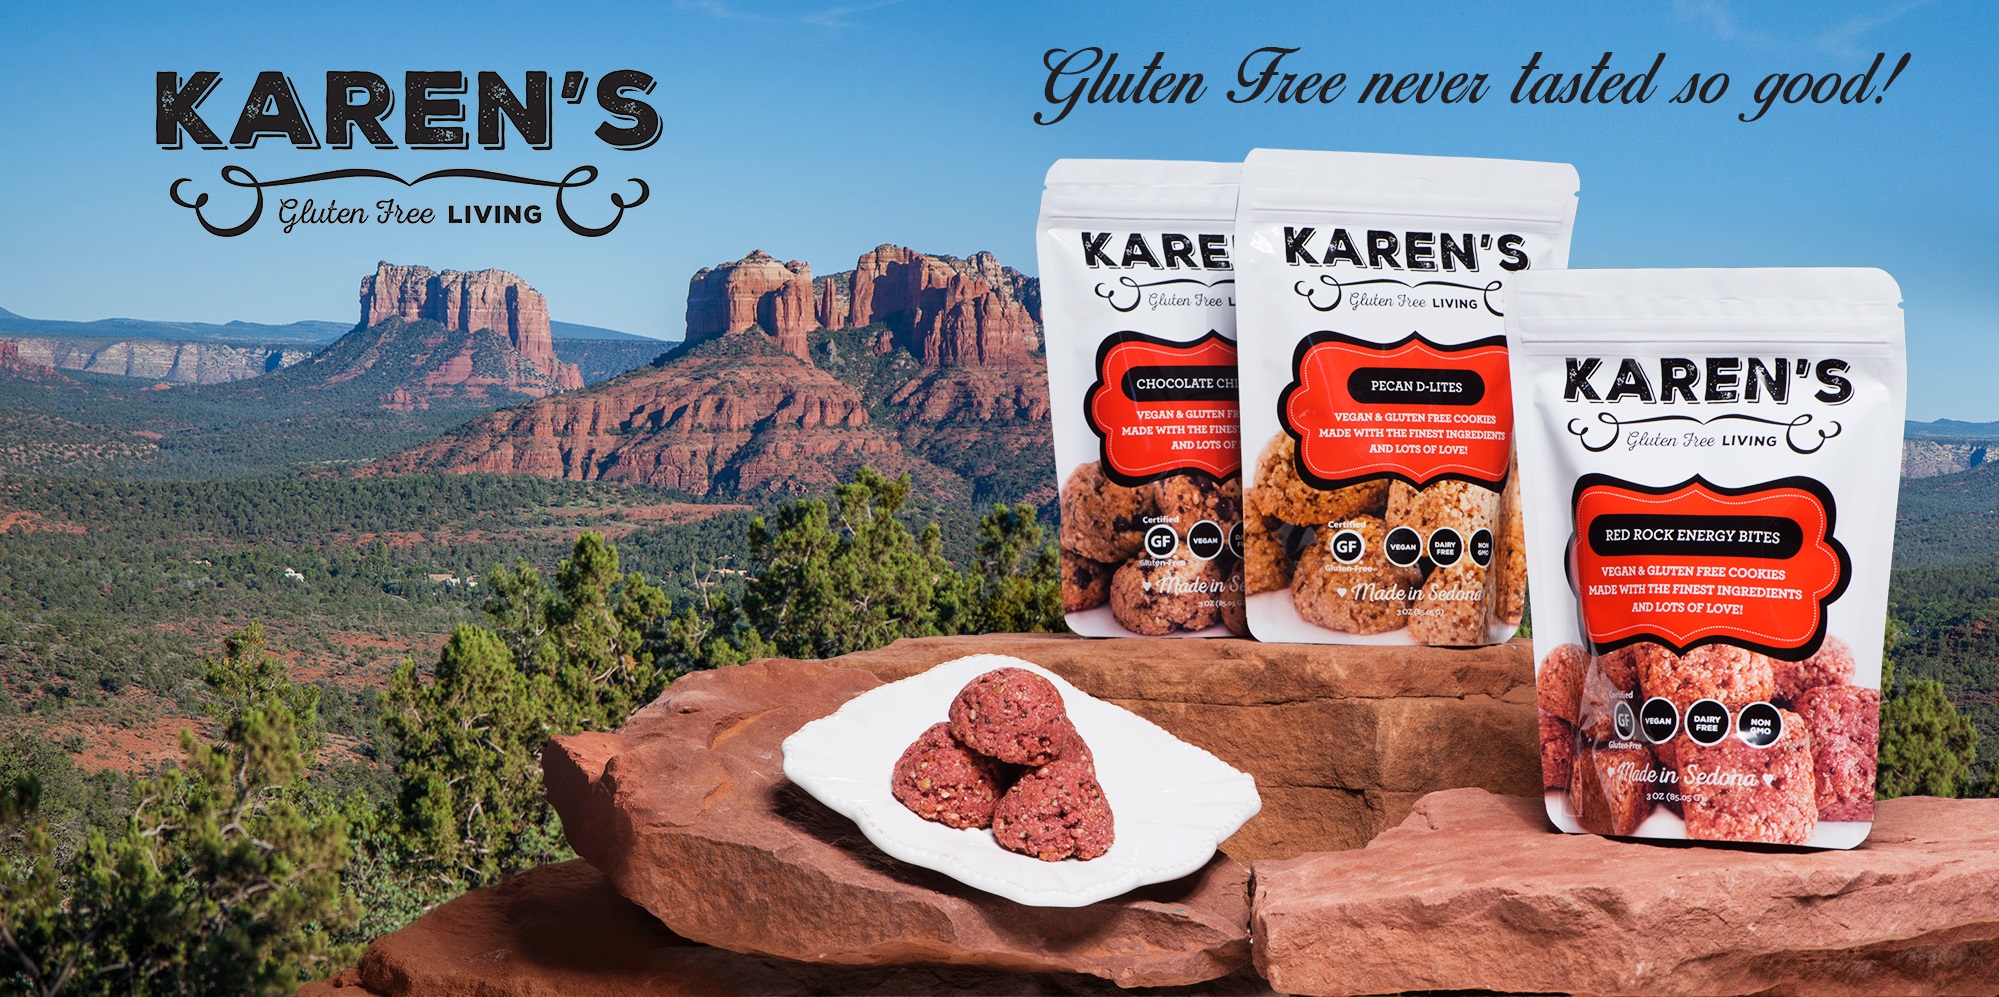 Karen\\\'s Gluten Free Living is utilizing Mr. Checkout\\\'s Fast Track Program to reach Independent Grocery Stores Nationwide.